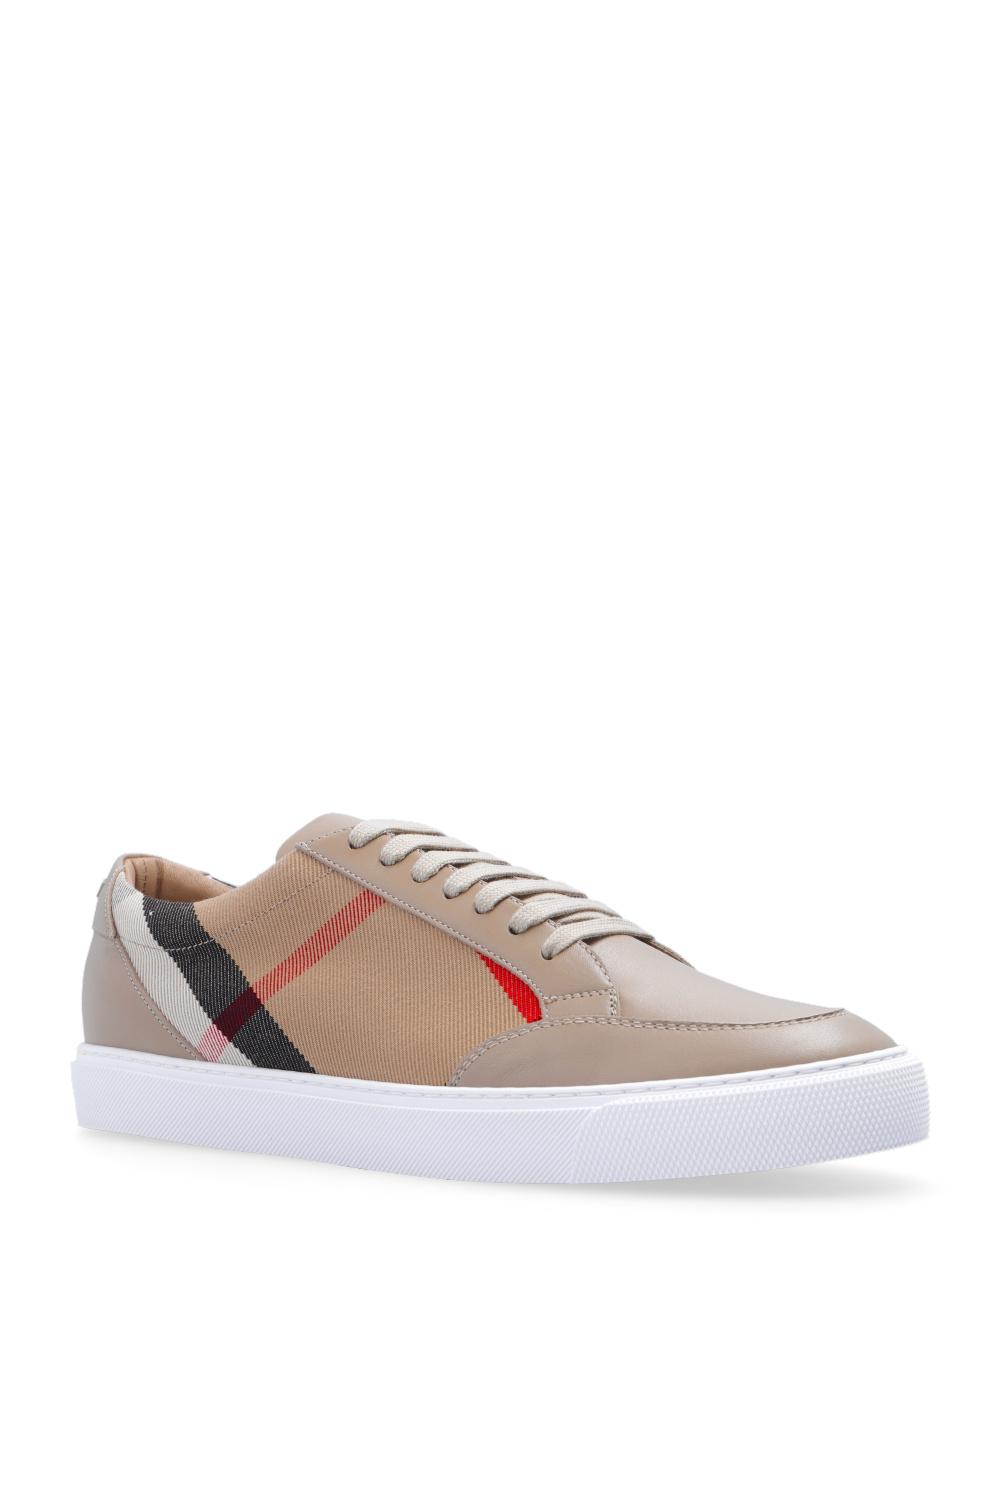 Burberry Leather 'new Salmond' Sneakers in Beige (Natural) | Lyst